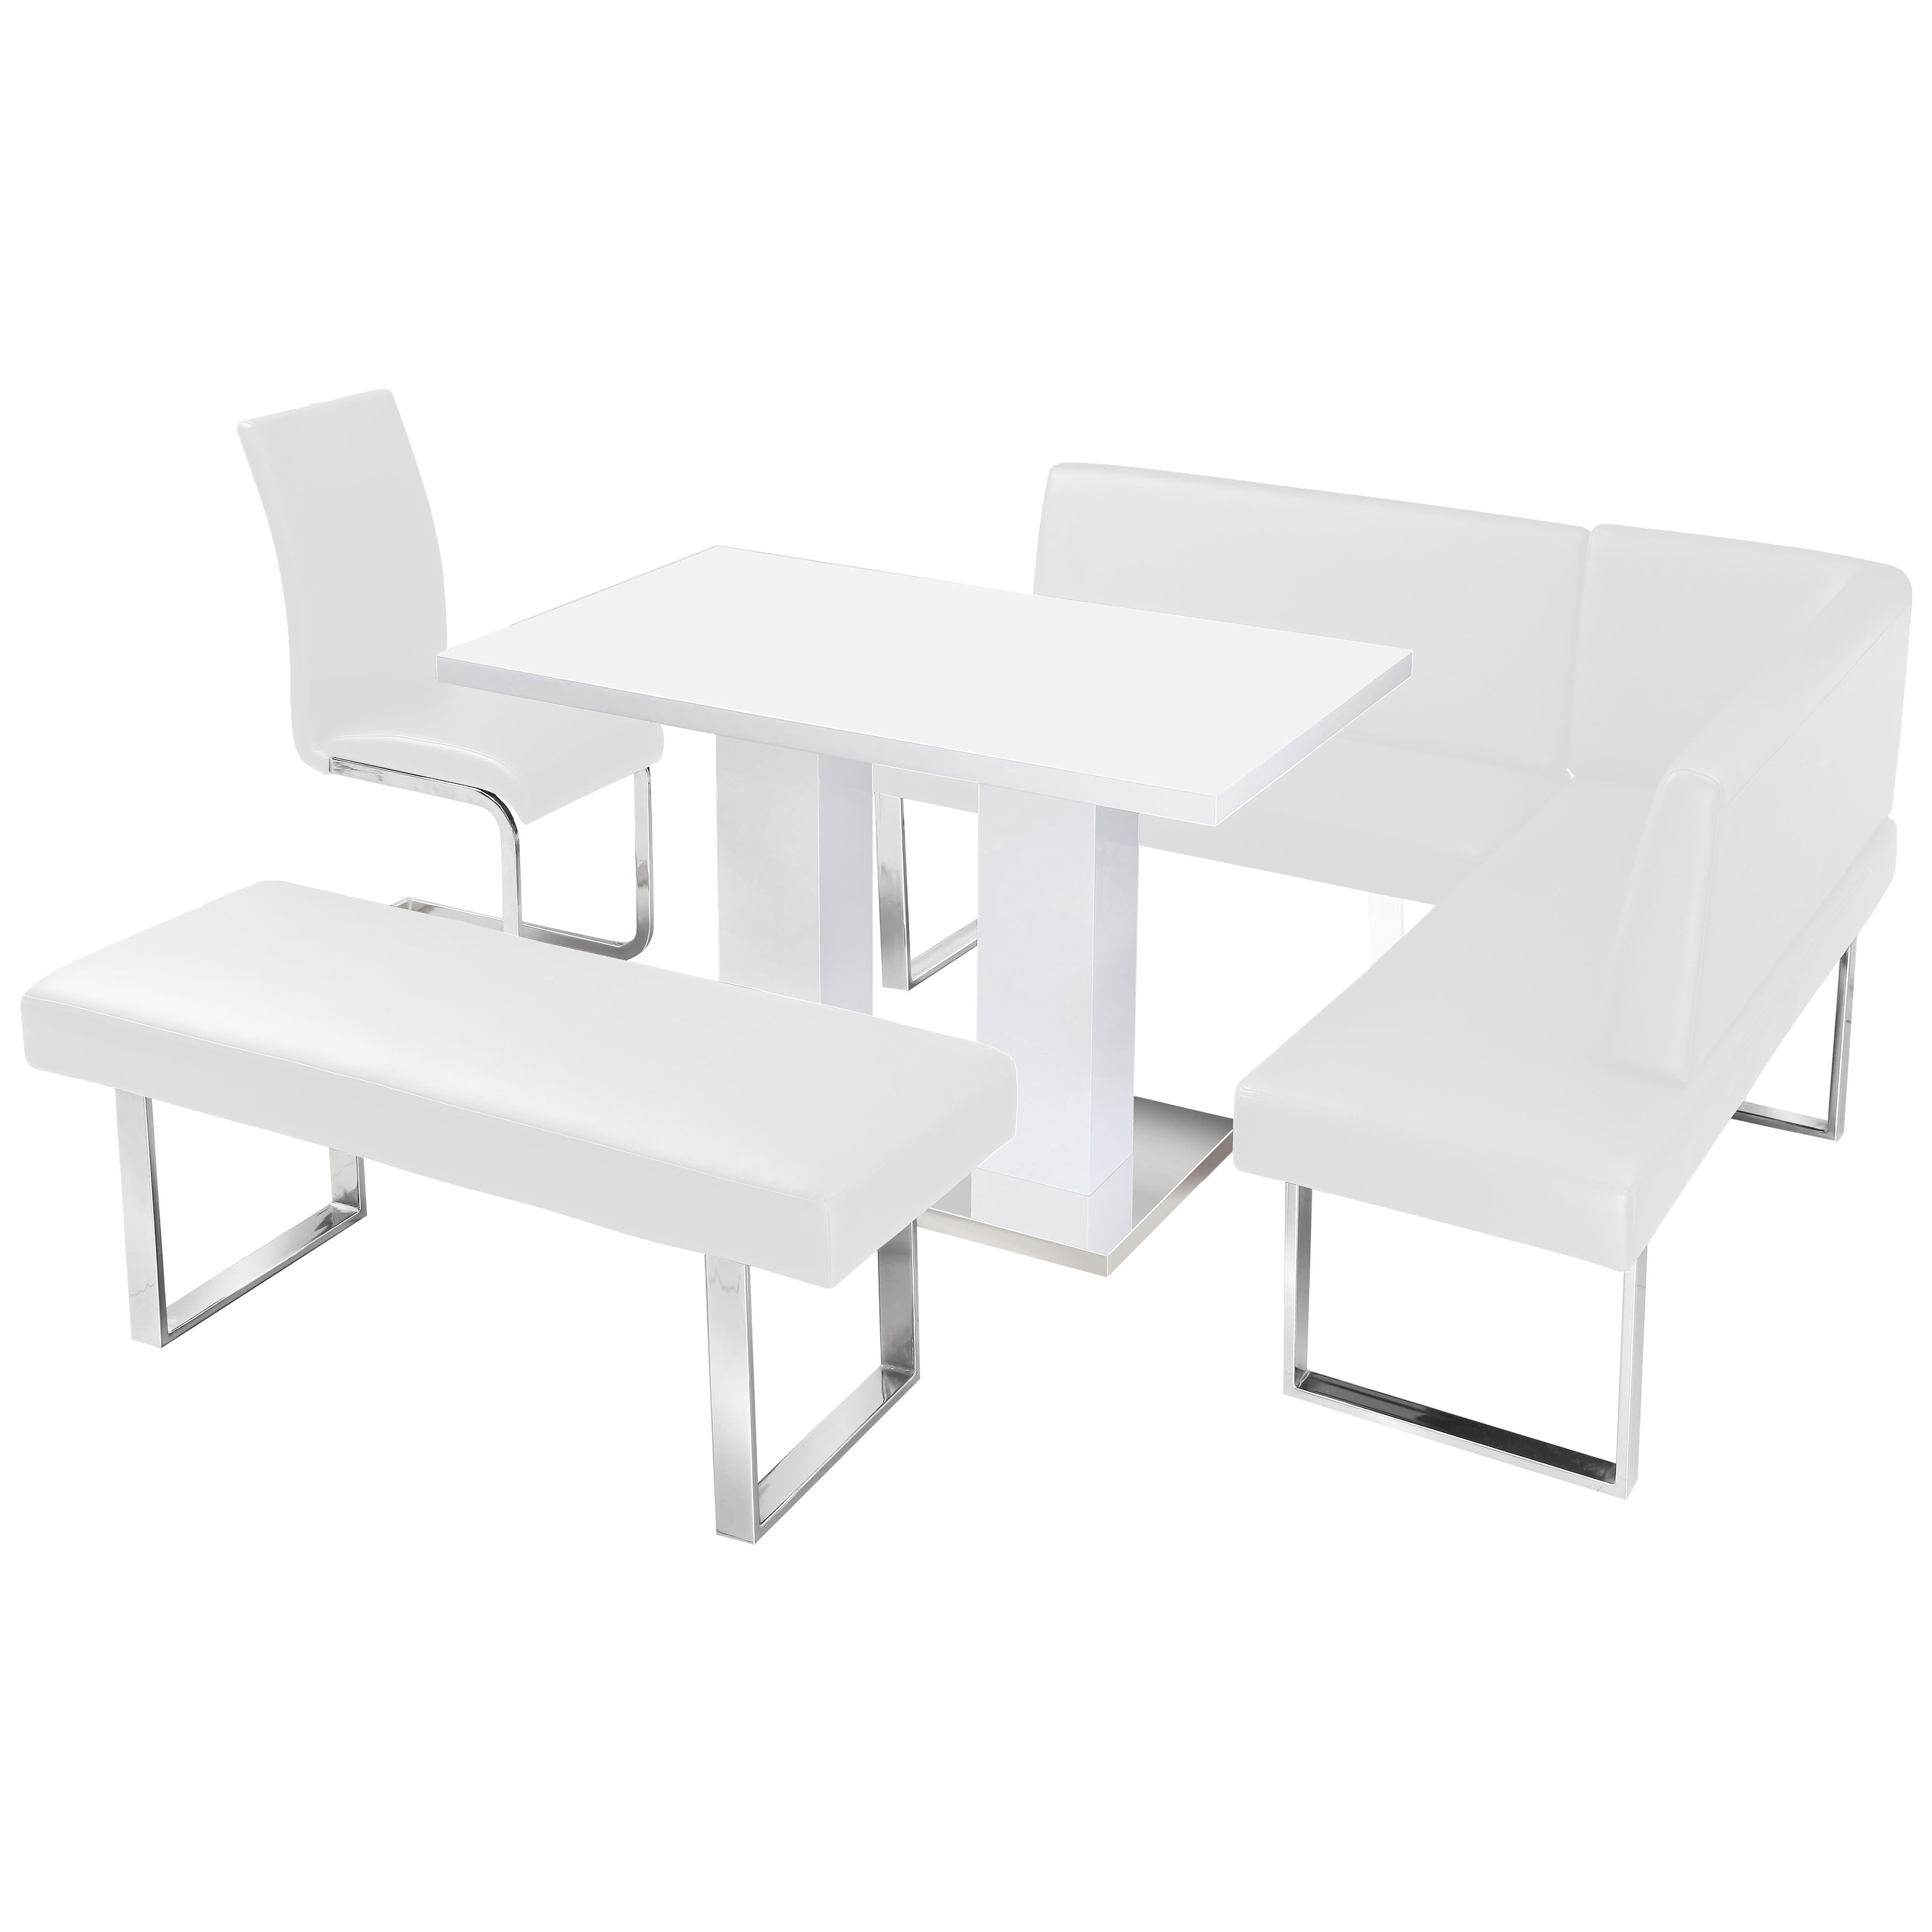 details about high gloss dining table and chair set with corner bench  1  seat  black white